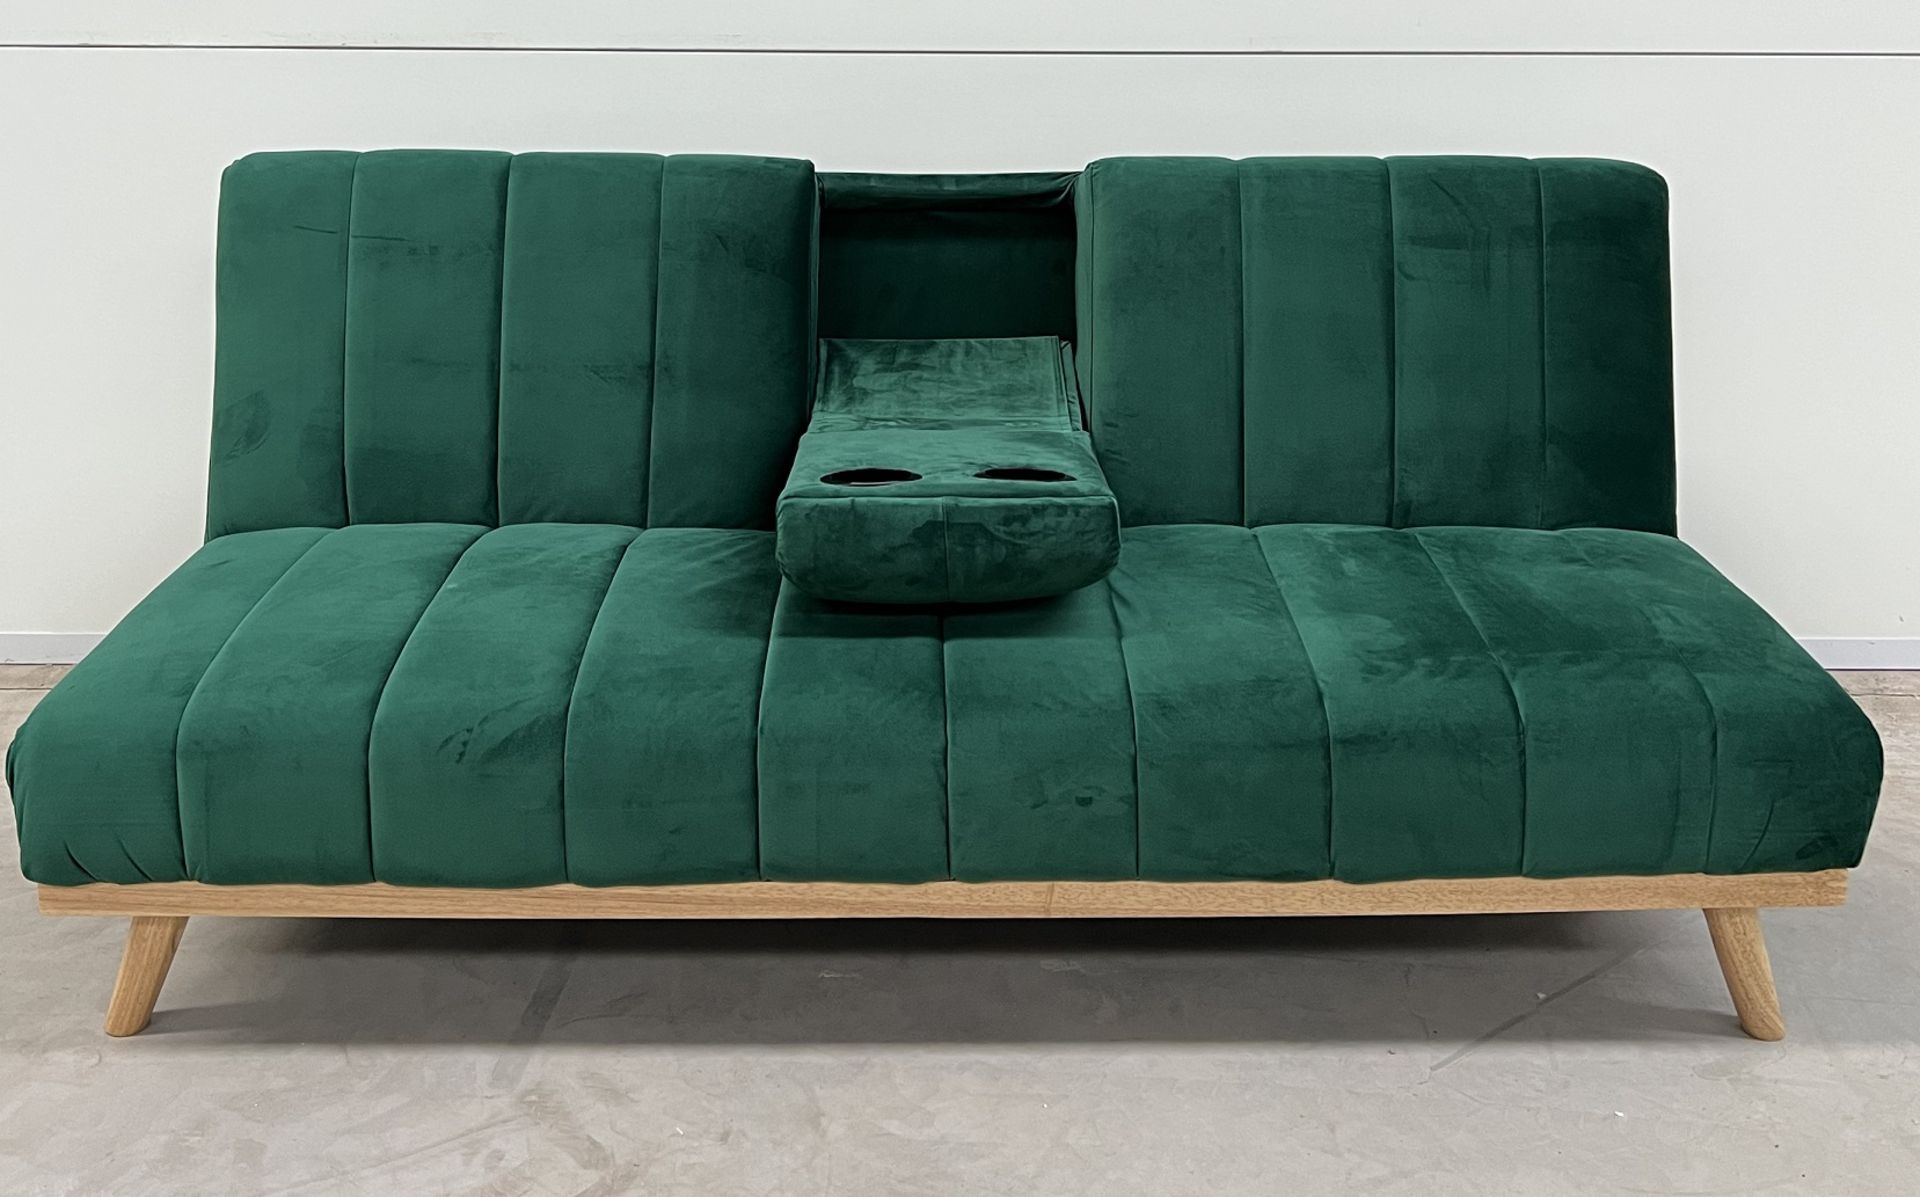 Etta Green Plush Velvet Sofa Bed Defined By It's Soft Curves And Low Rise Design As Well As Subtle - Bild 2 aus 3